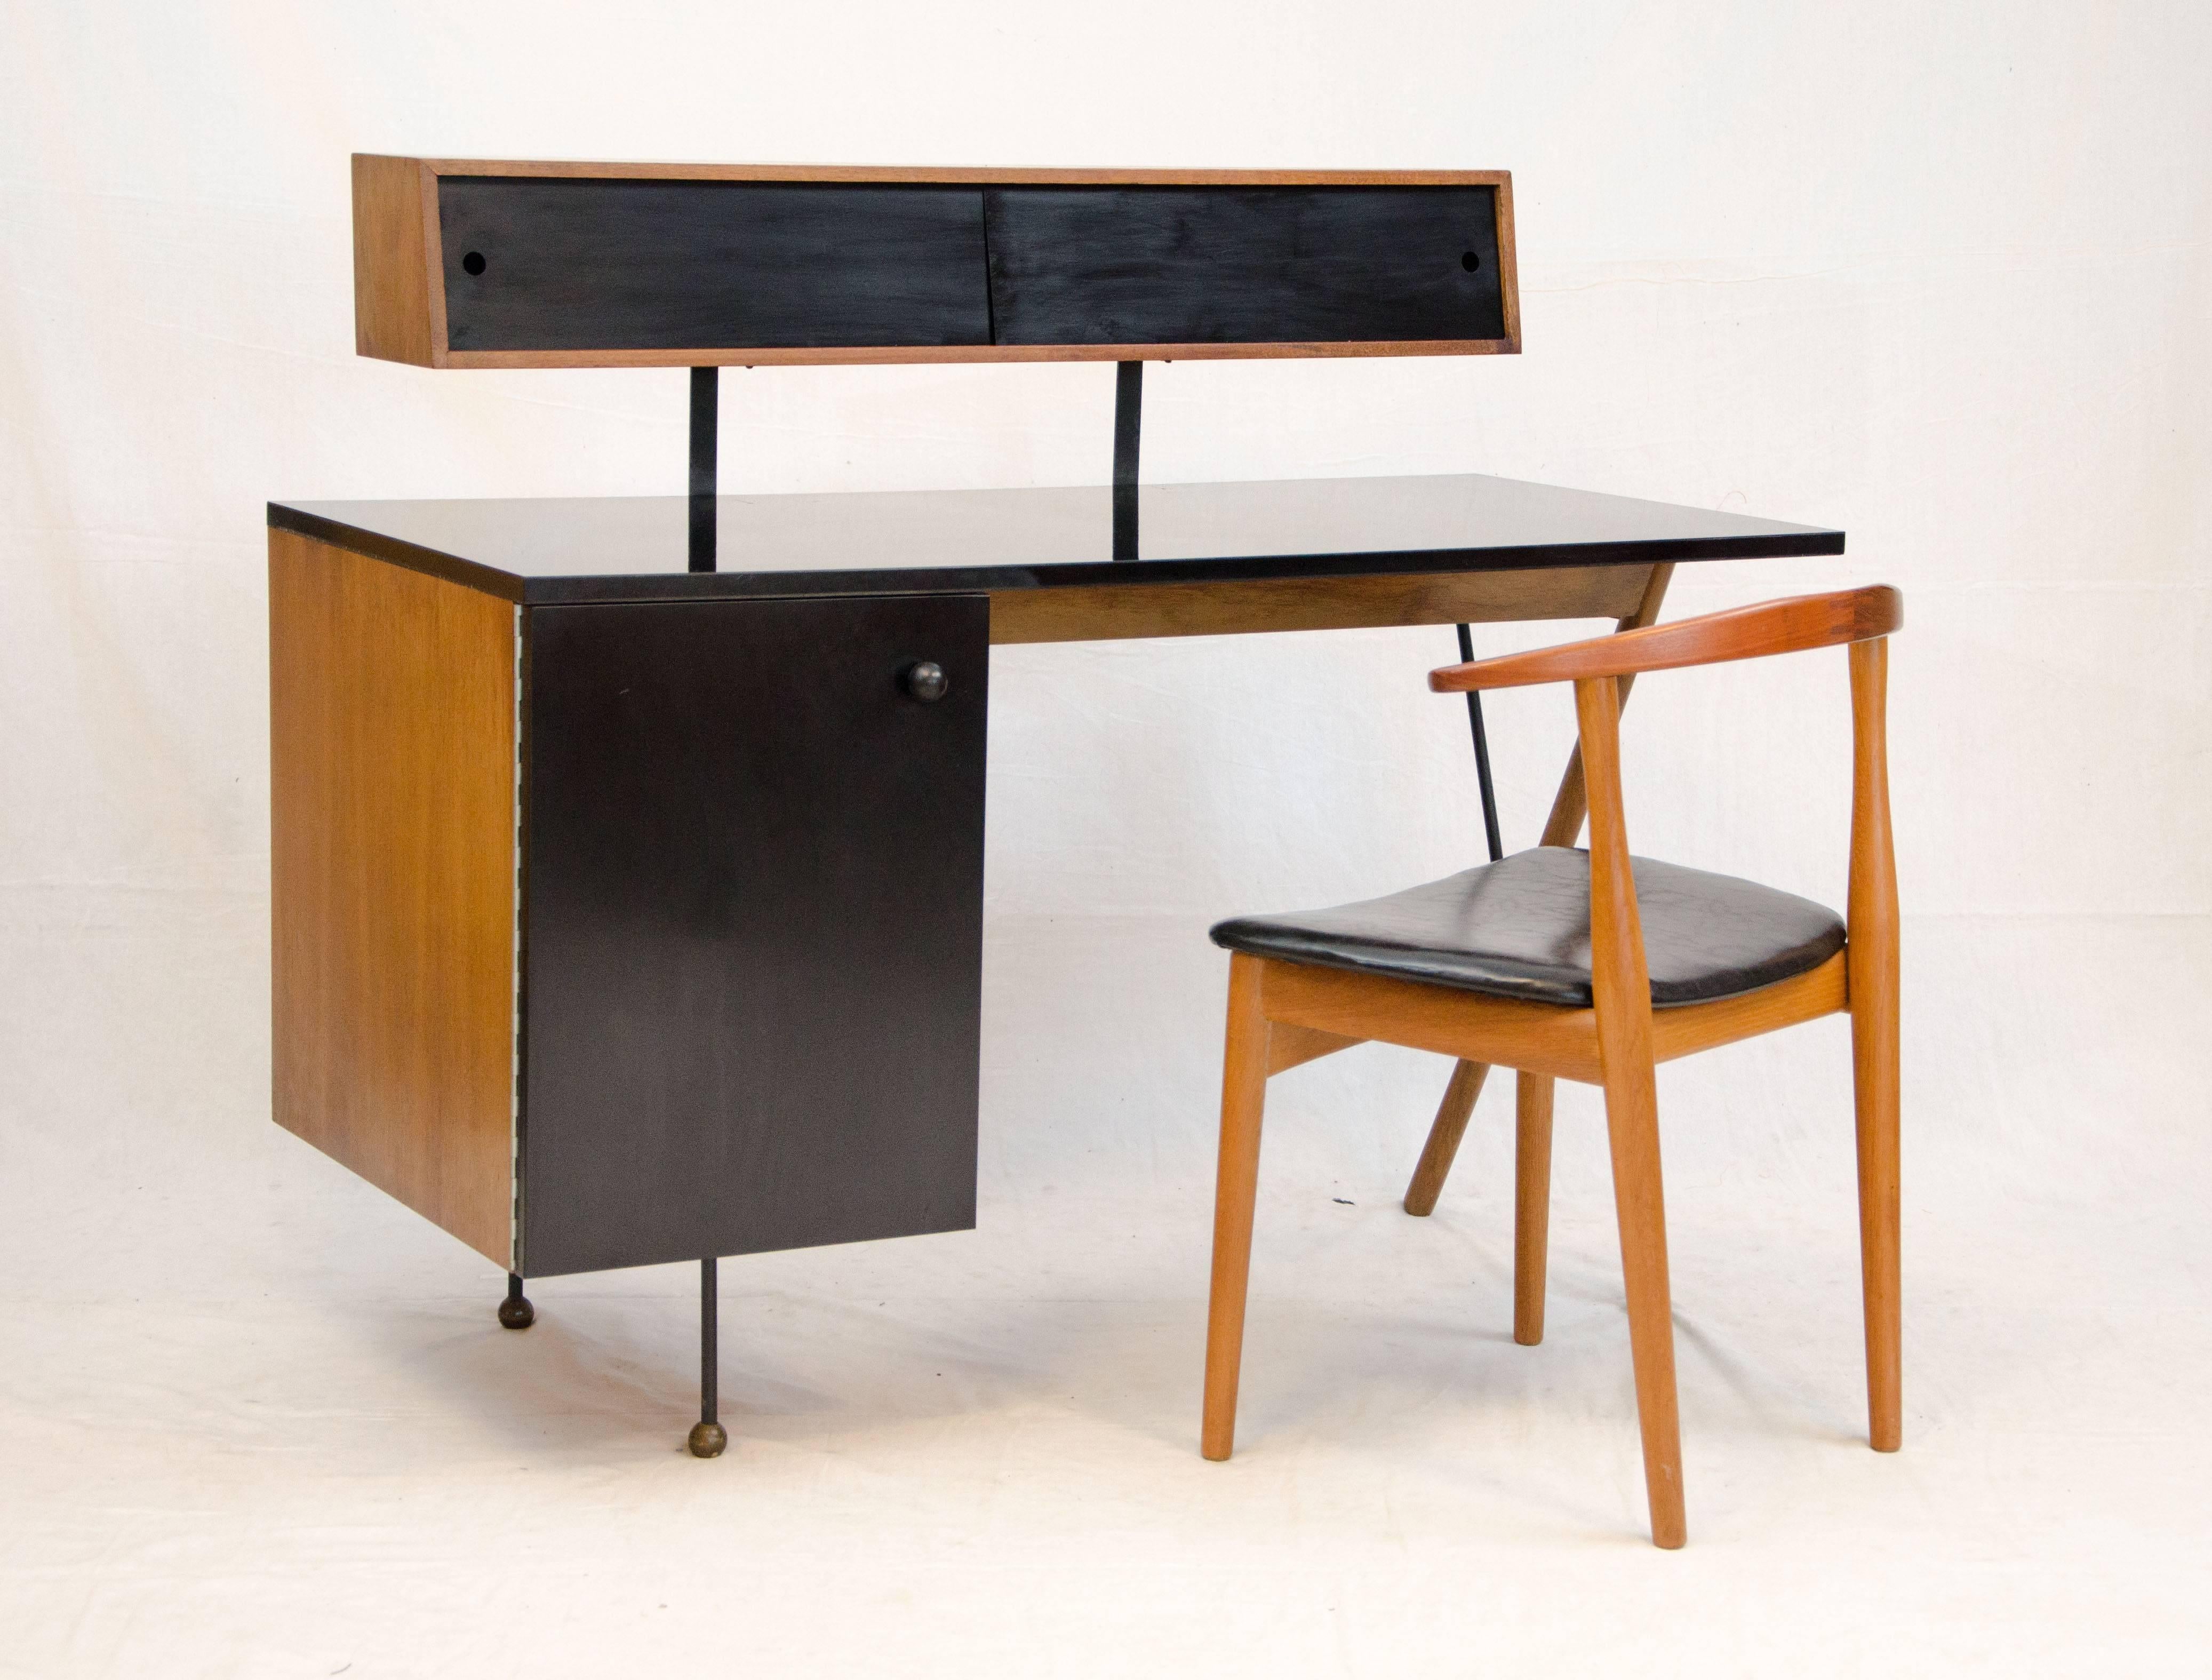 Rare and beautiful California modern desk designed by Greta Grossman and manufactured by Glenn of California. This example is all original and has a complete cabinet interior with both drawers and a pull out shelf. This desk is also the early